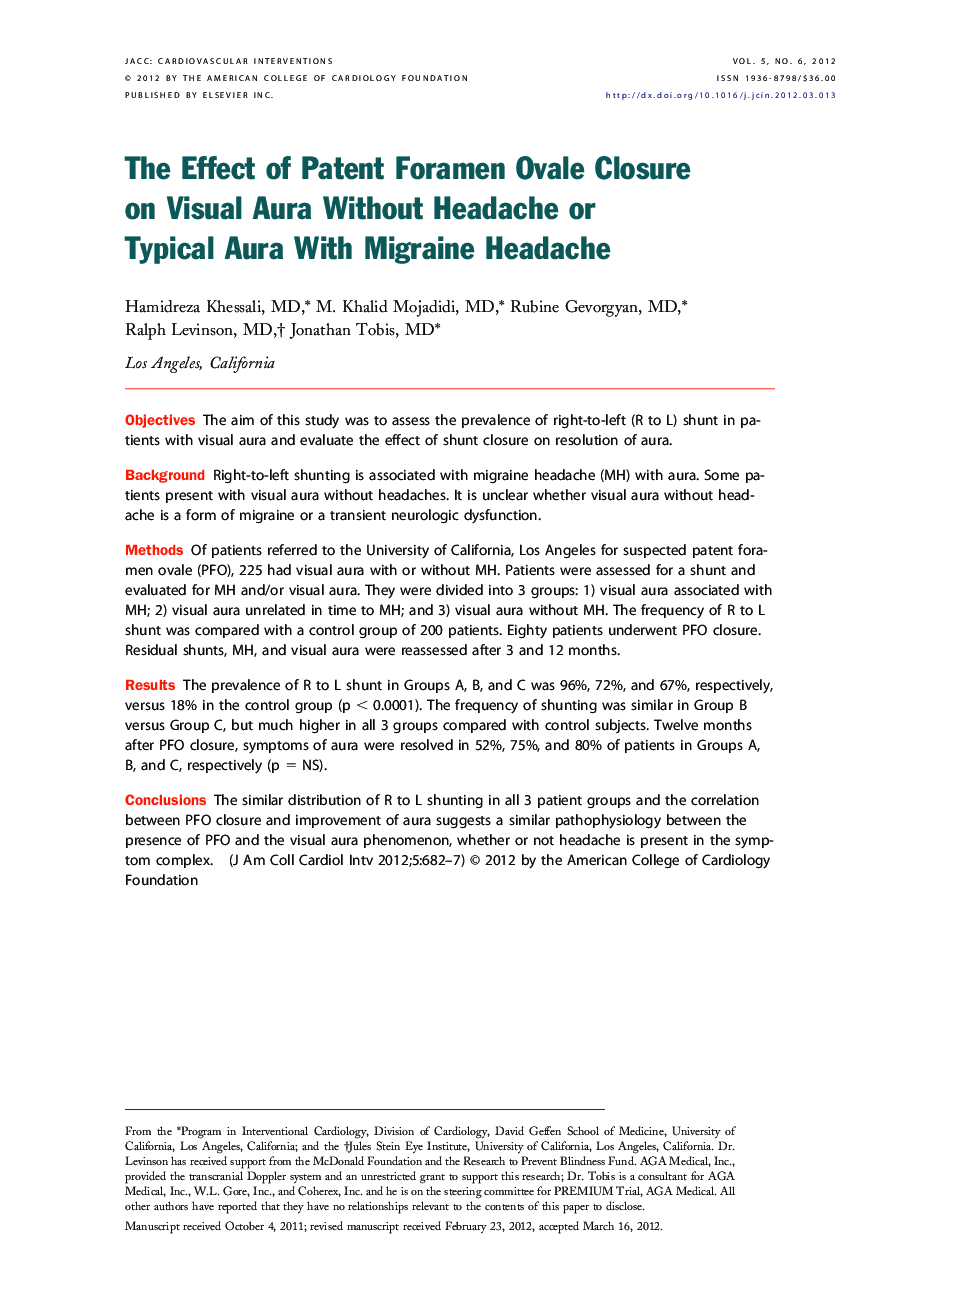 The Effect of Patent Foramen Ovale Closure on Visual Aura Without Headache or Typical Aura With Migraine Headache 